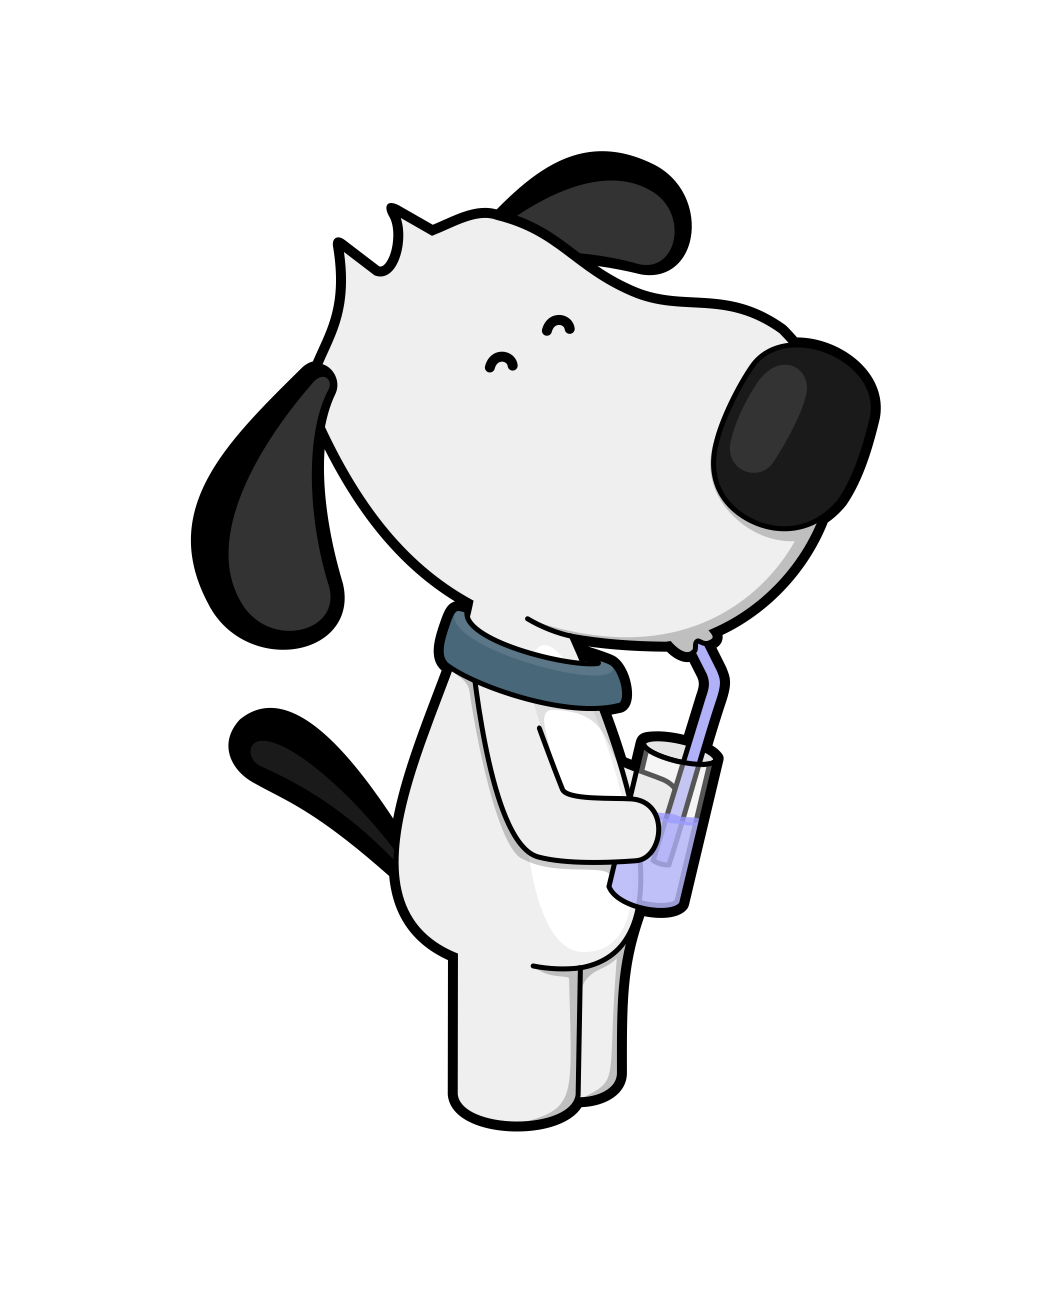 a cartoon image of a dog drinking a glass of water